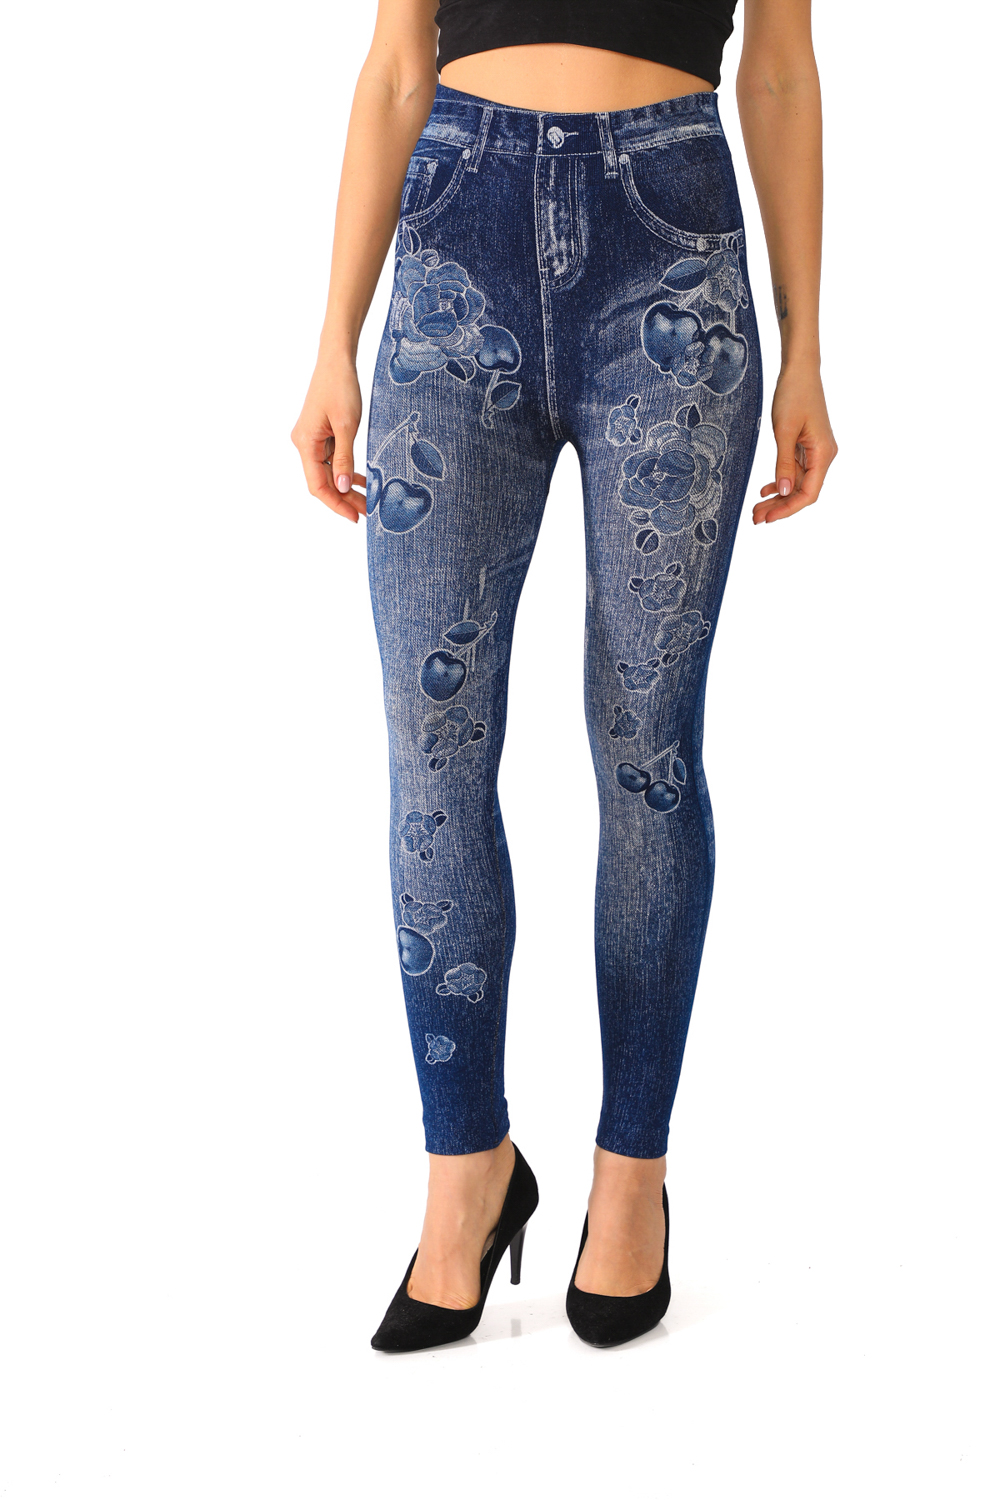 Denim Leggings with Floral and Cherries Pattern - Its All Leggings